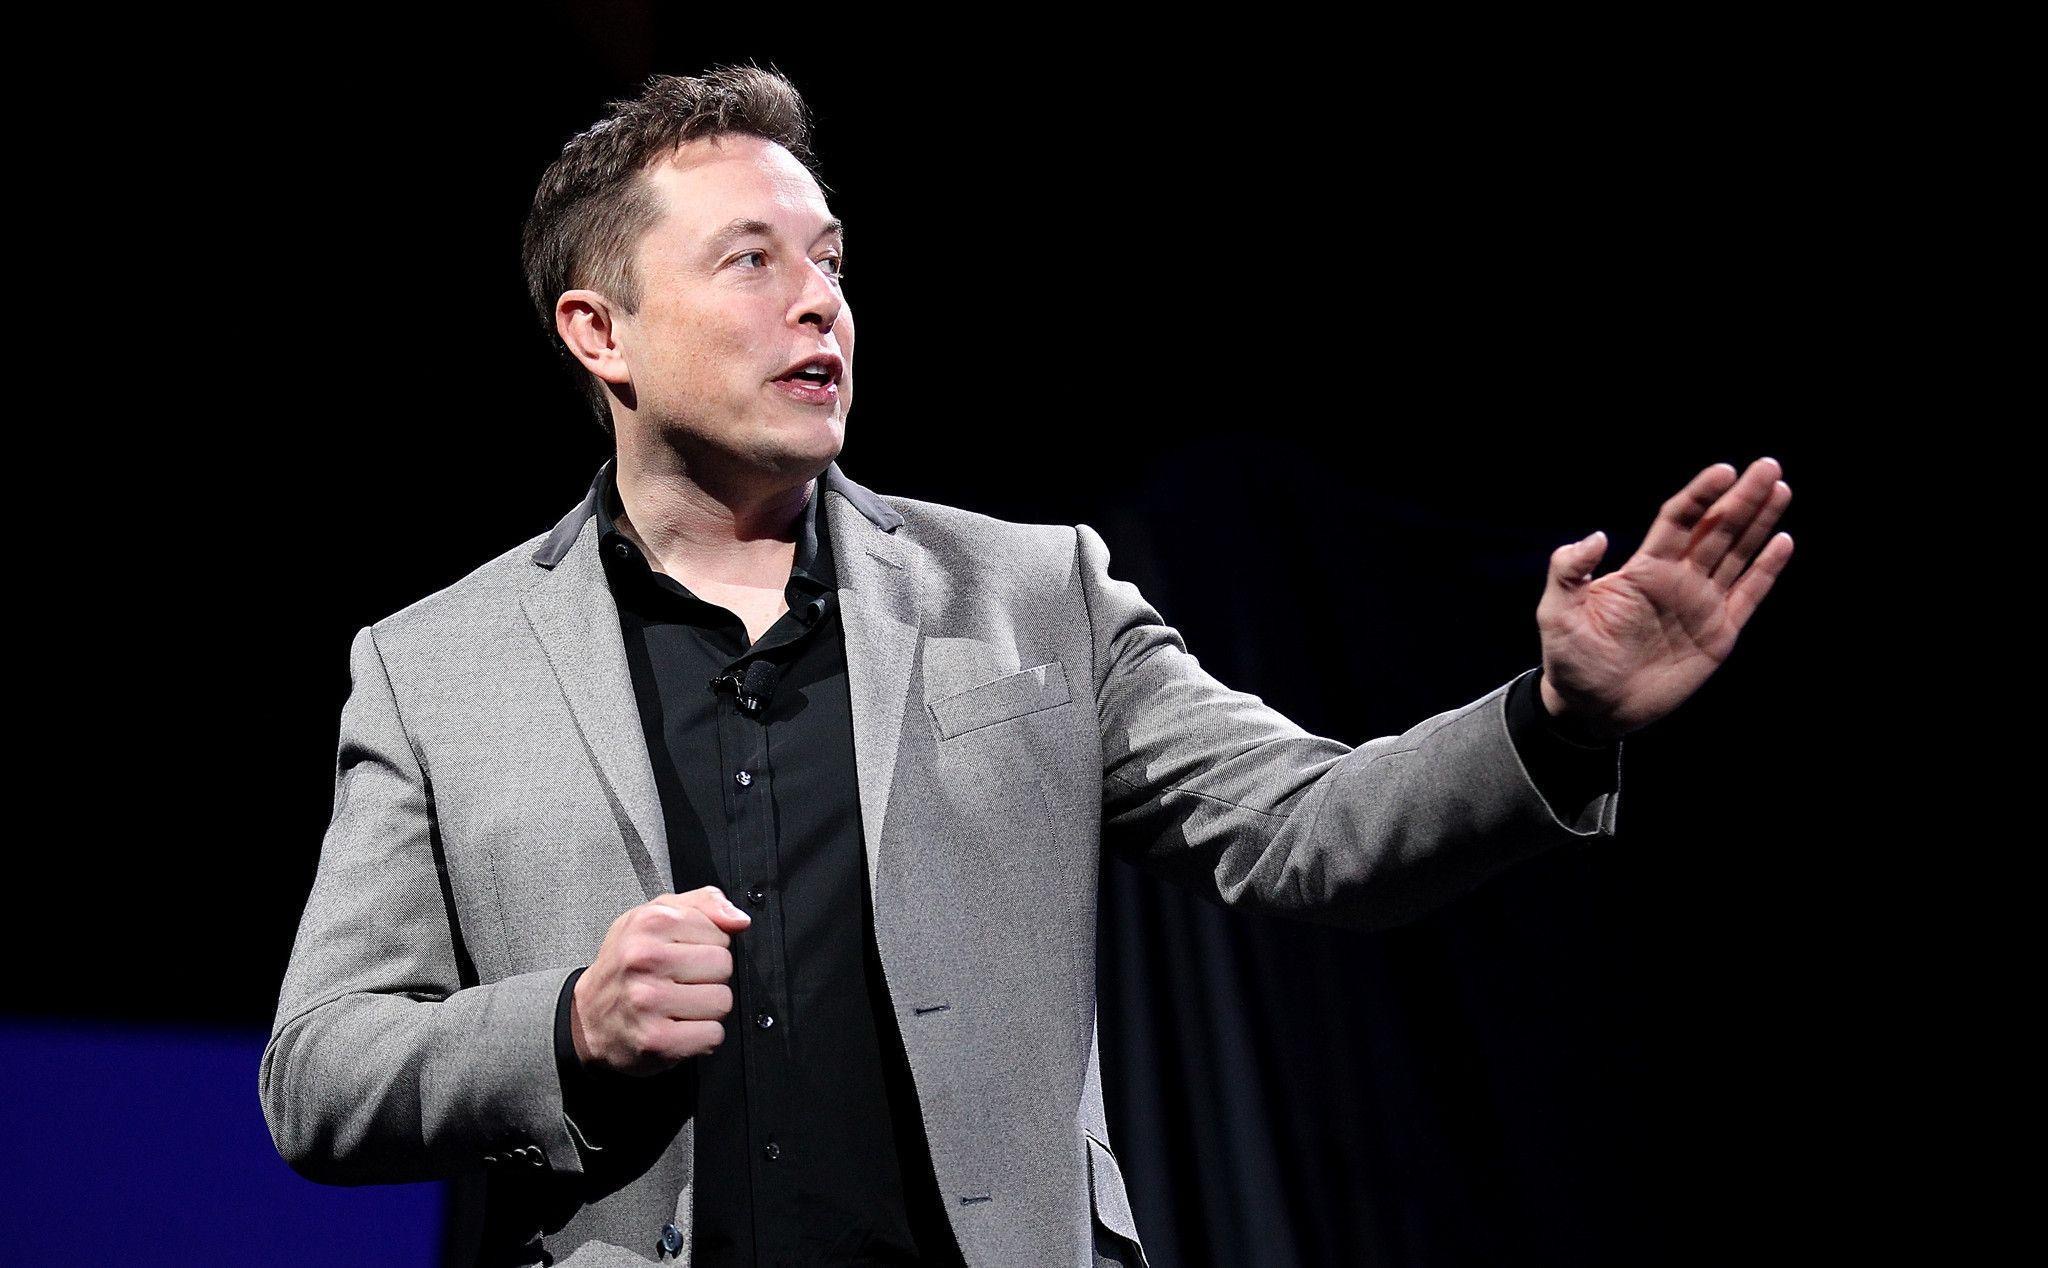 ELON MUSK SAYS TWITTER DEAL CANNOT PROCEED OVER SPAM ACCOUNTS